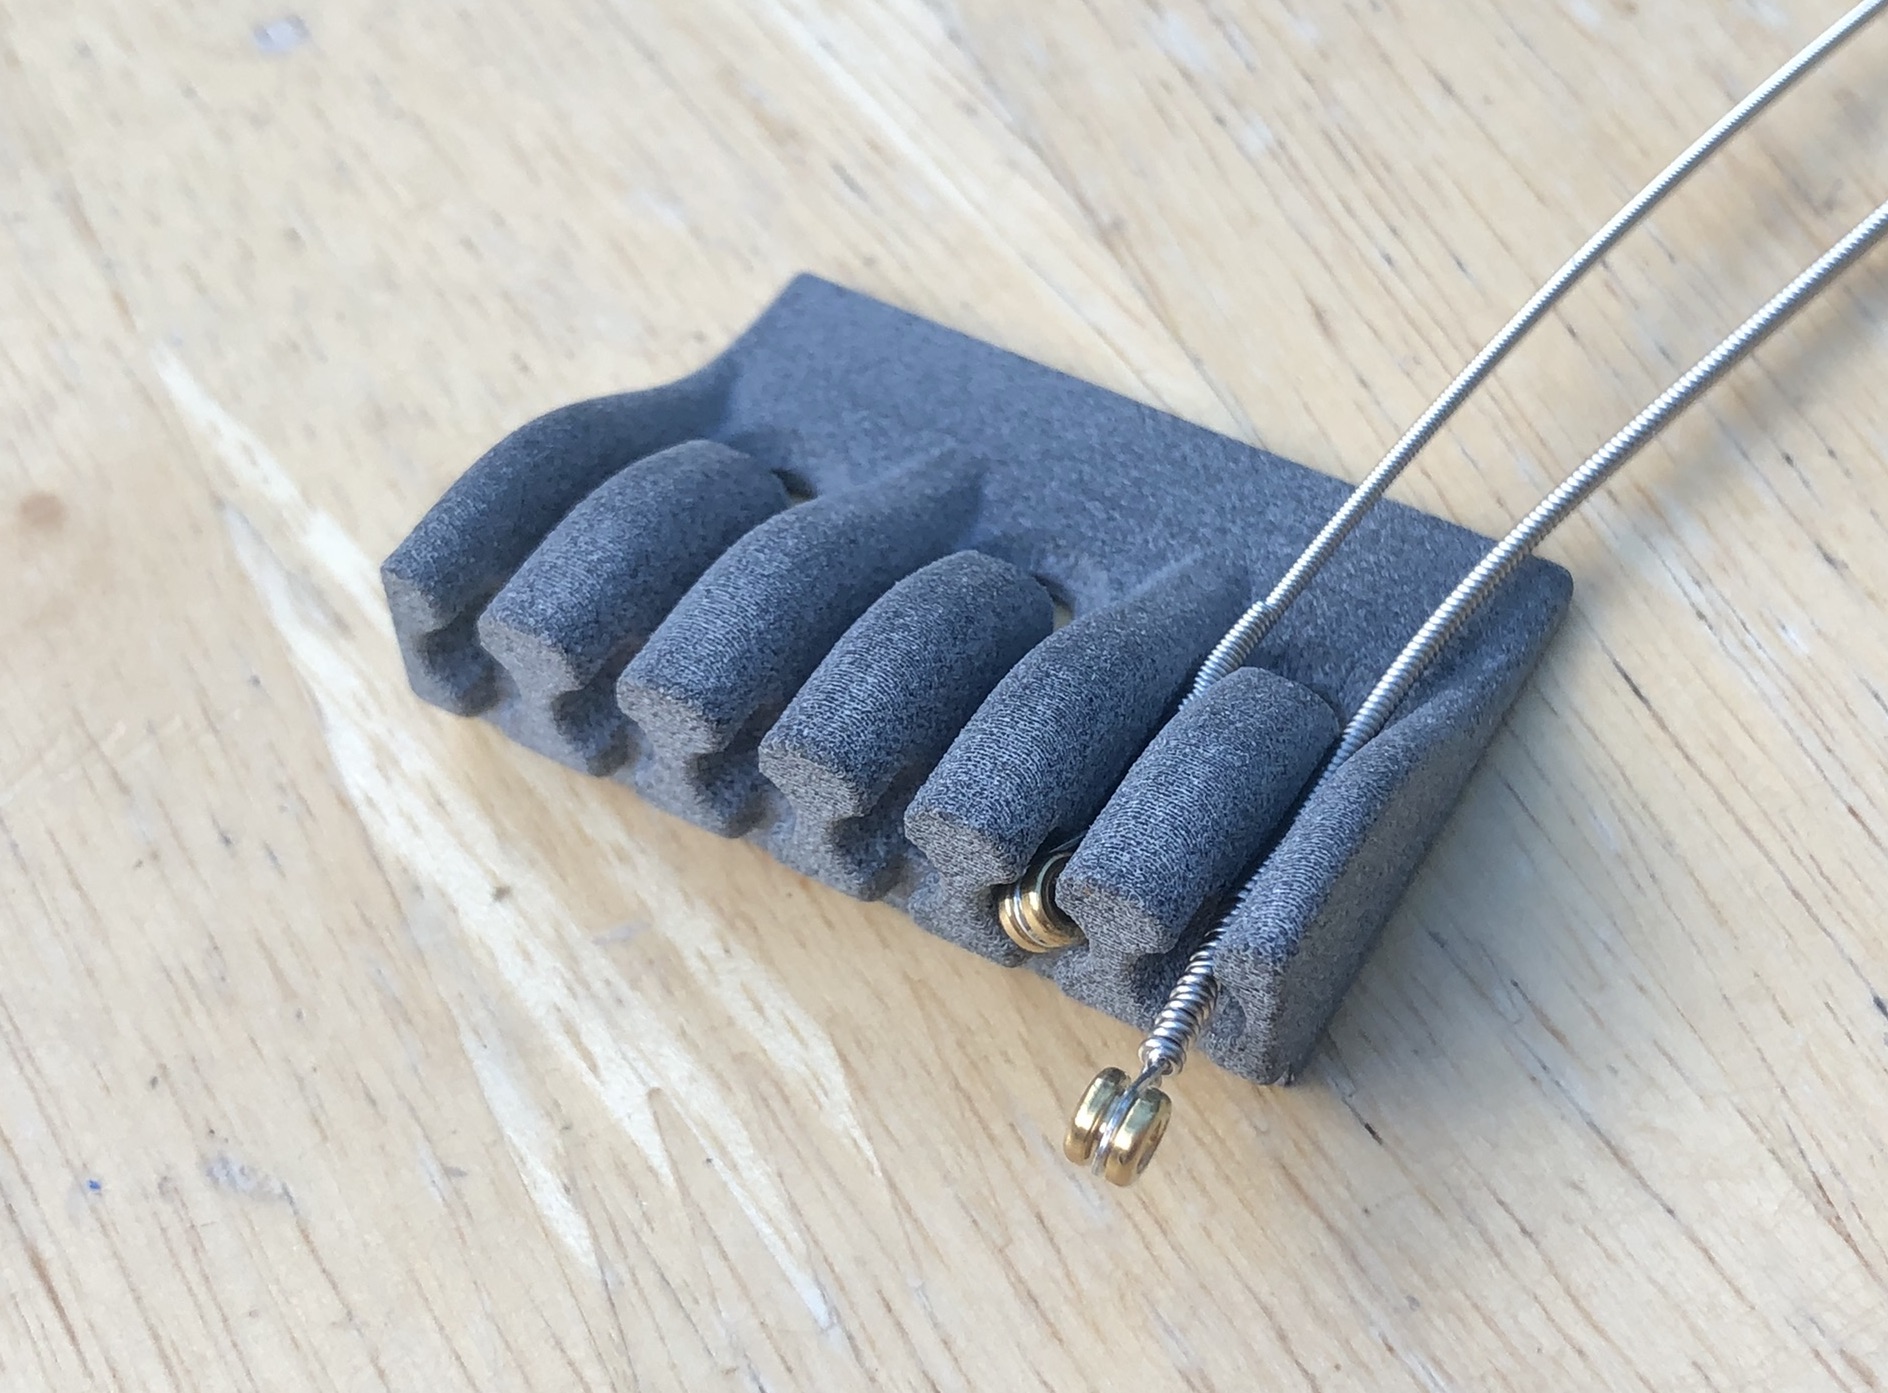 A photo of a 3D-printed plastic part that has 6 channels in it that end in little thimbles. In one channel sits a guitar string with the ball end sat in the thimble. In another channel a string sits over the channel as it's too wide to fit in.